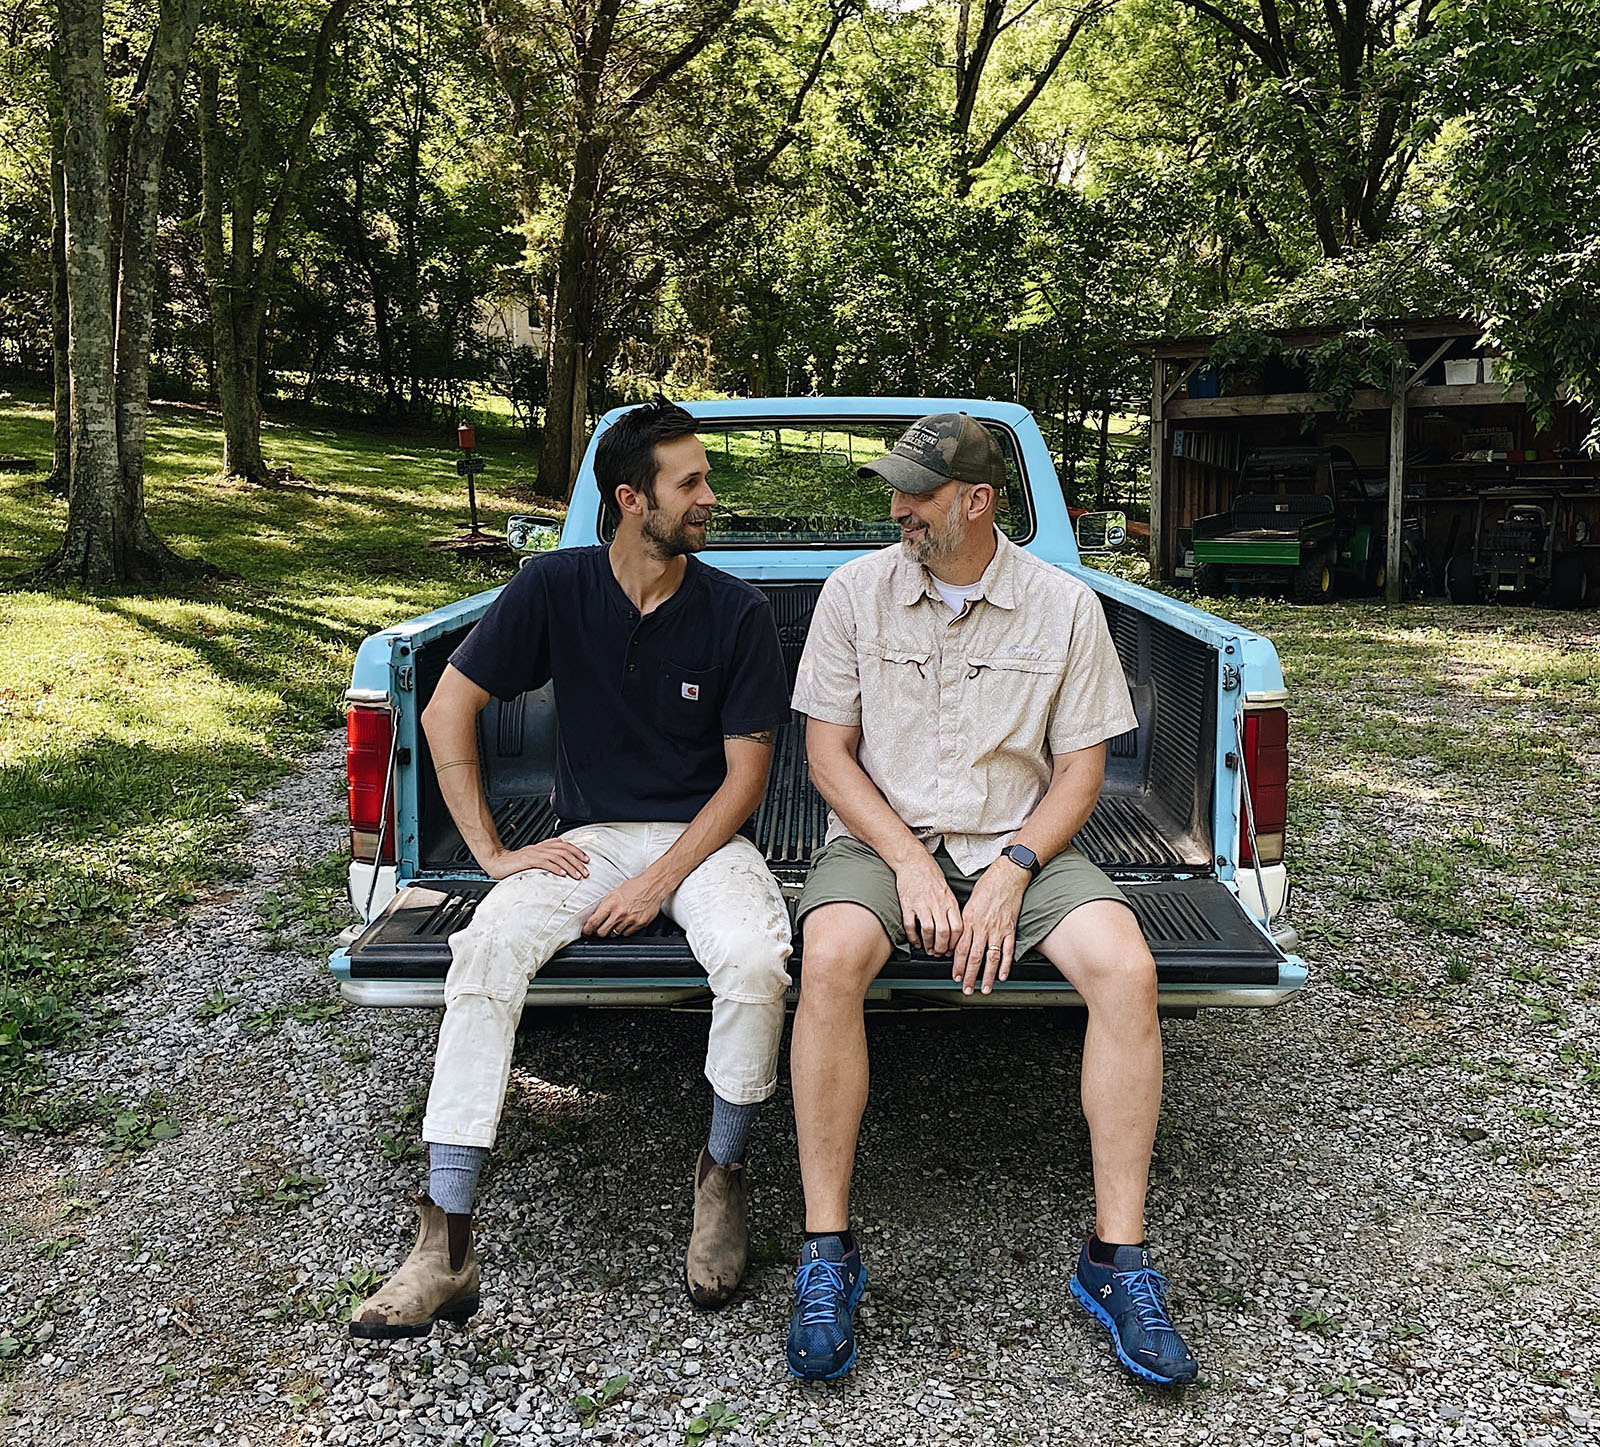 A young man and his father sitting on the back of a truck in a wooded setting.